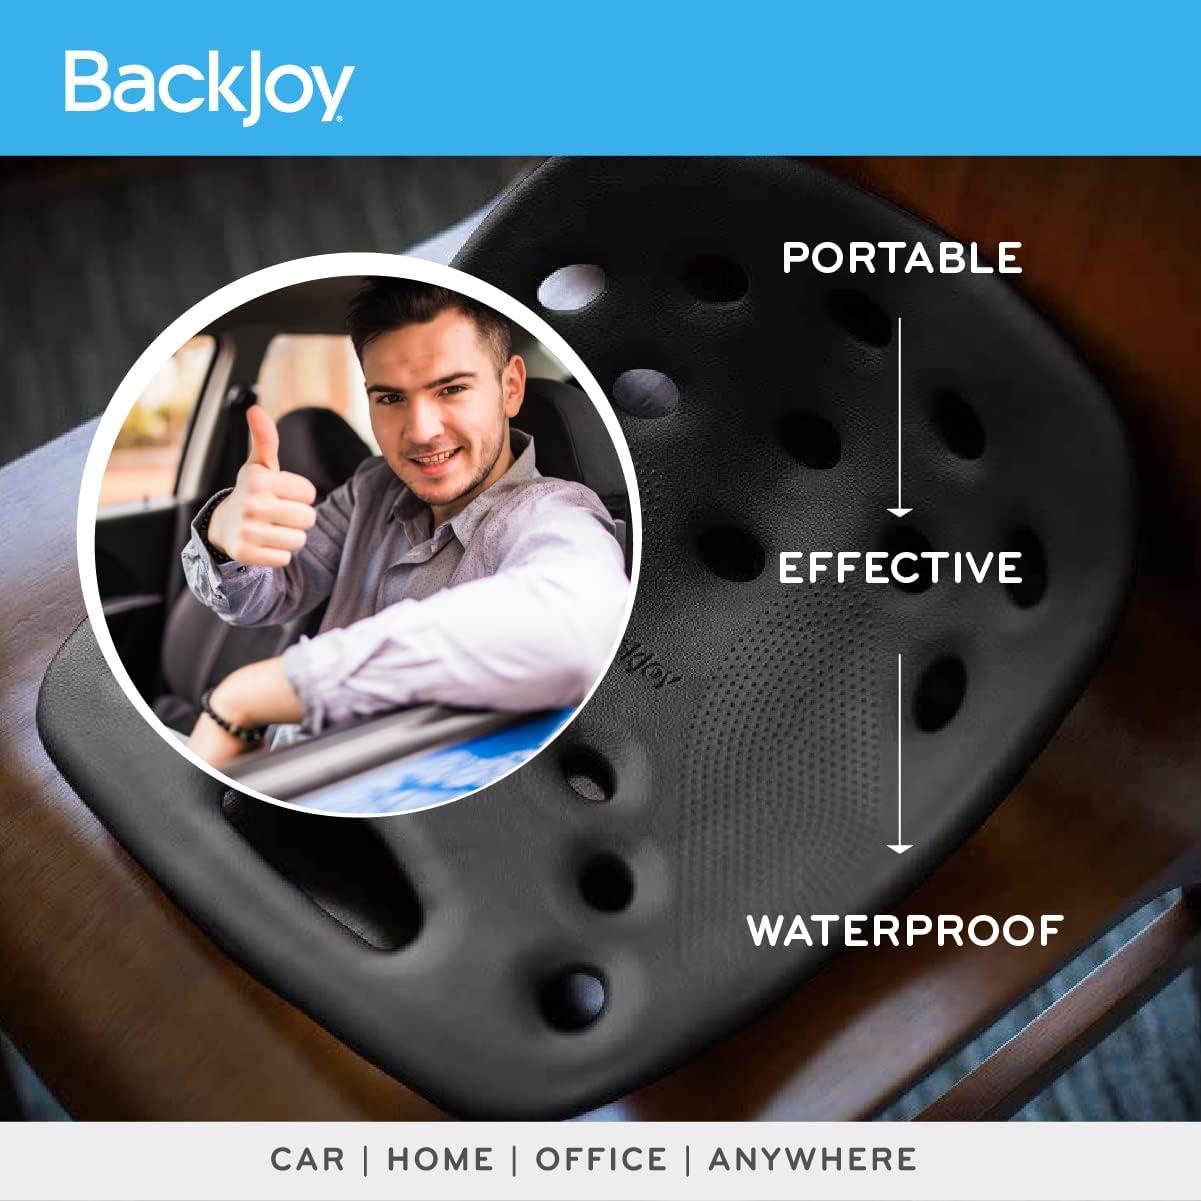 BackJoy Posture Seat Pad | Ergonomic Pressure Relief, Hip & Pelvic Support  to Improve Posture | Home, Office Chair, Car Seat, Waterproof | Fits SL